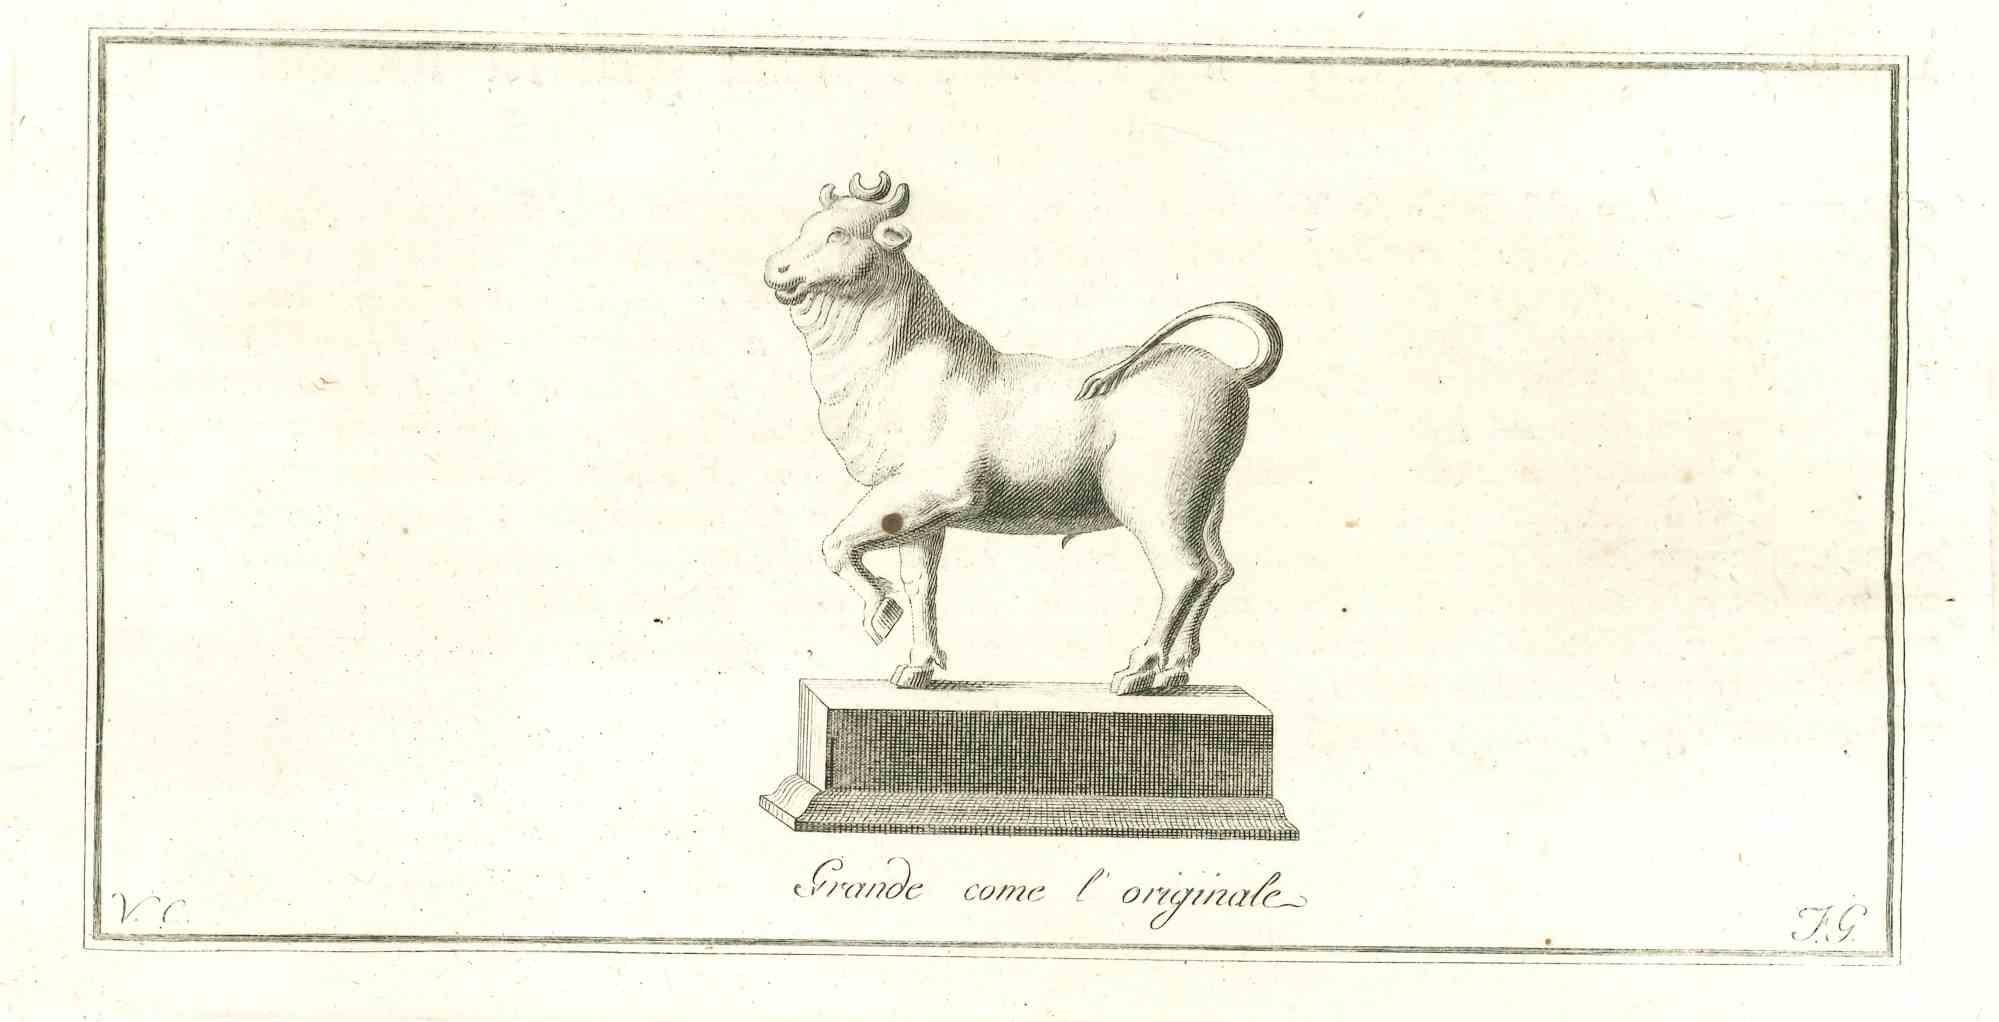 Ancient Roman Statue, from the series "Antiquities of Herculaneum", is an original etching on paper realized by Vincenzo Campana in the 18th century.

Signed on the plate on the lower left.

Good conditions but aged.

The etching belongs to the